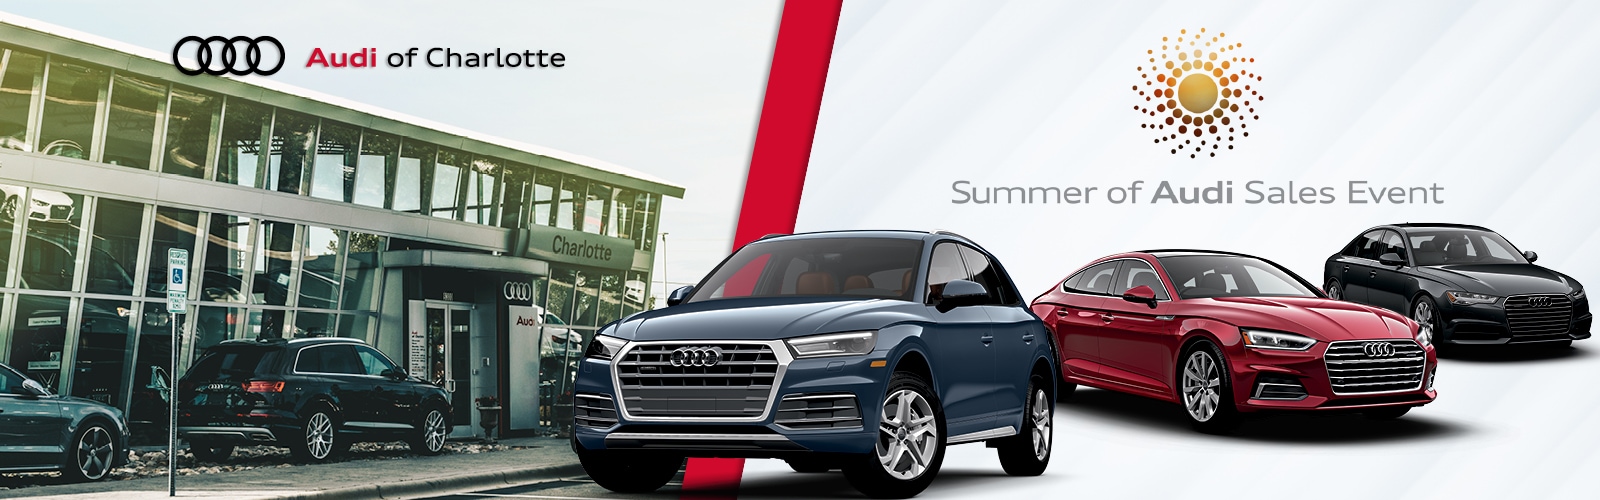 Save During the Summer of Audi Sales Event Audi Charlotte